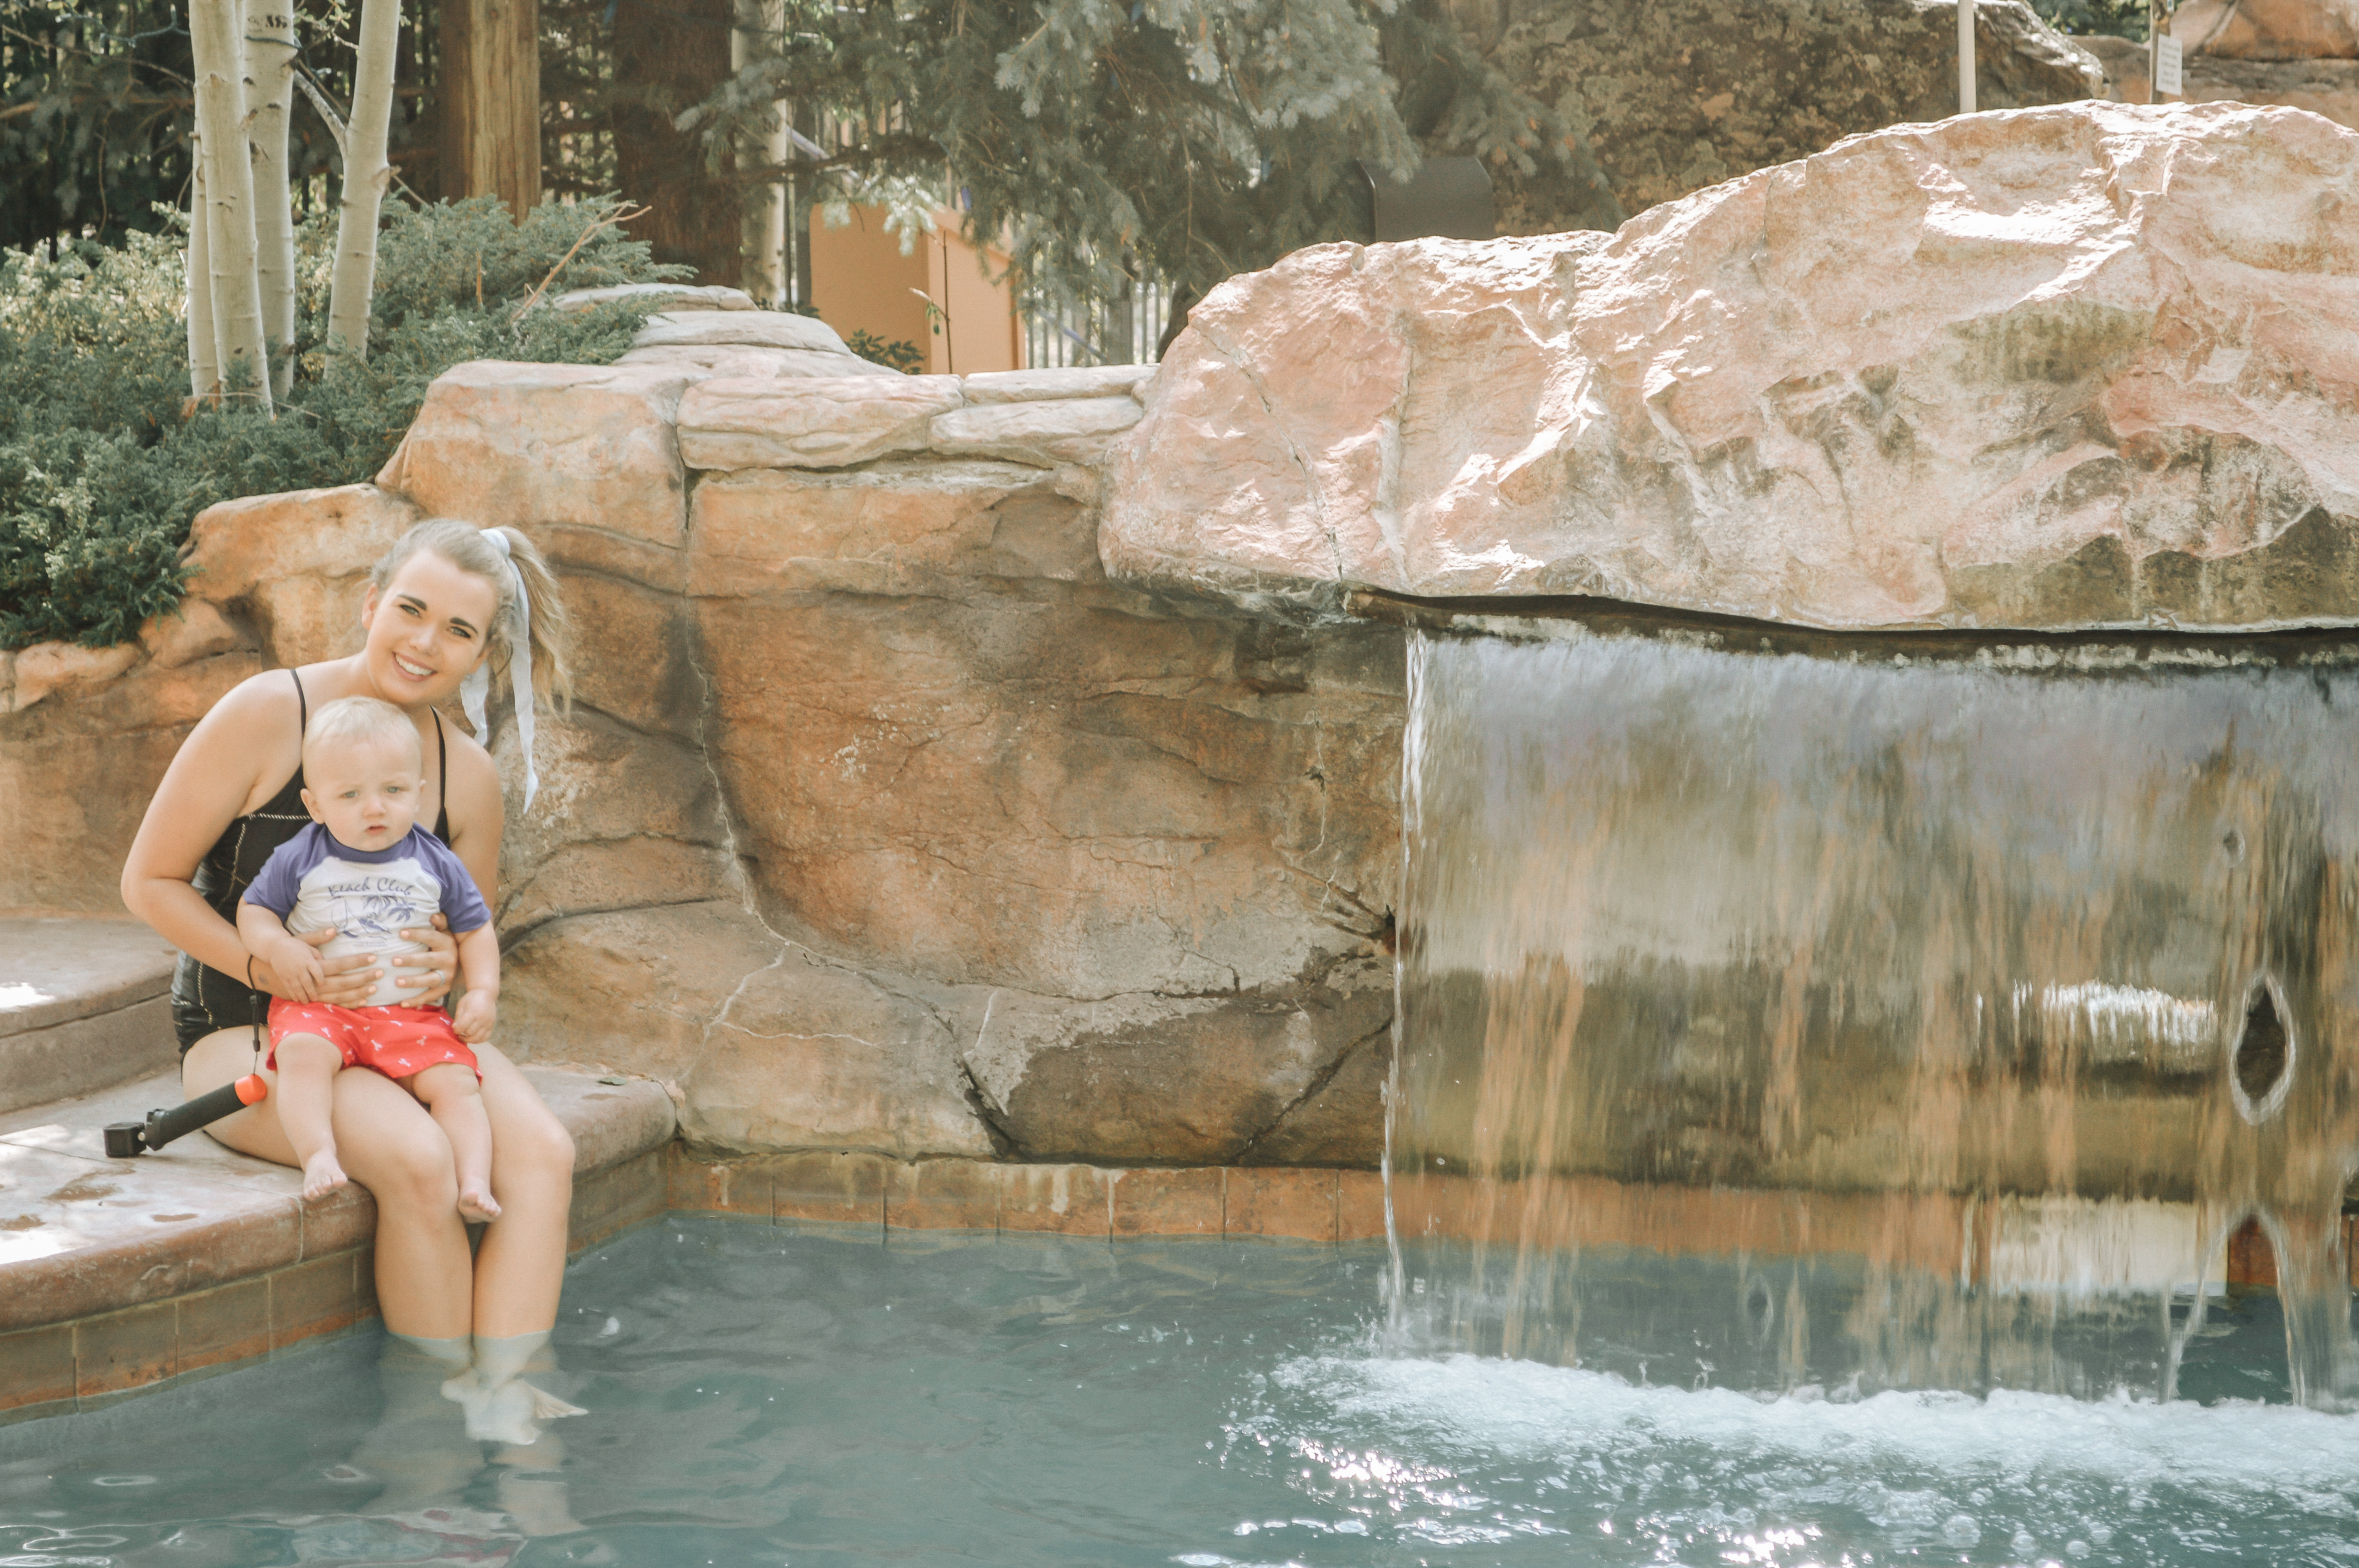 The Springs at River Run review featured by popular Denver travel blogger, All Things Lovely